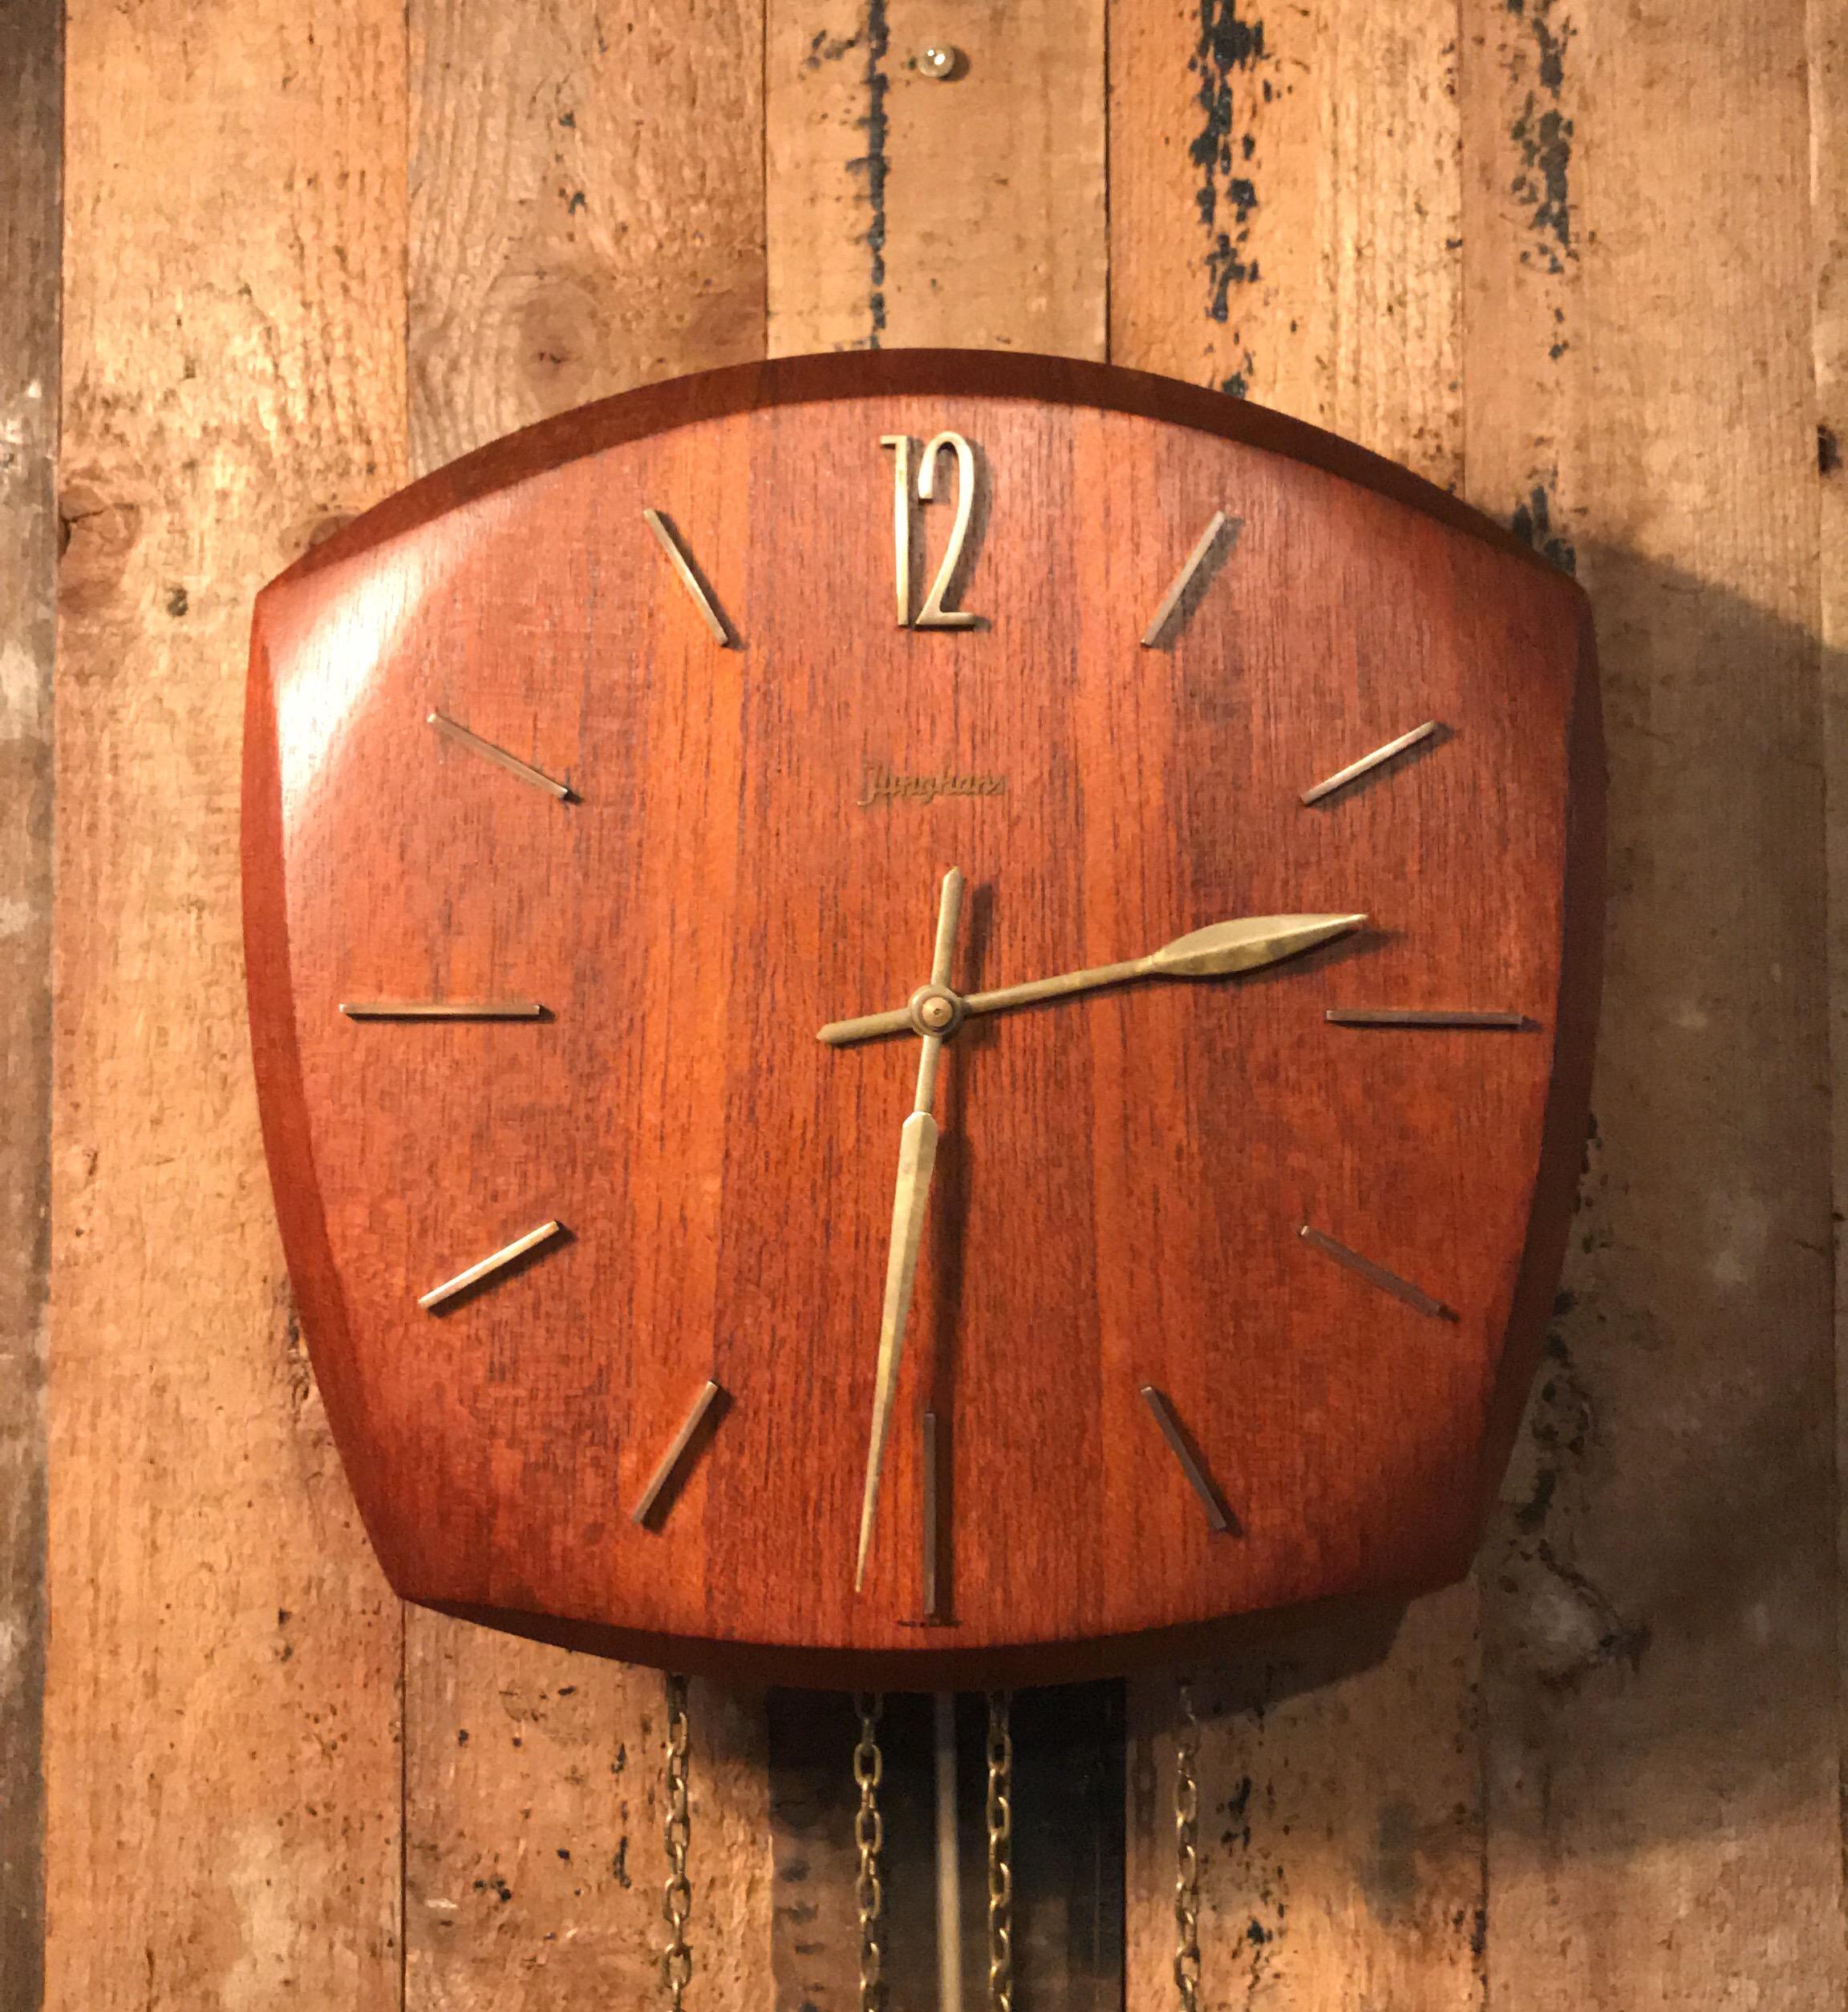 Very handsome teak and brass pendulum wall clock made by Junghans of Germany in classic midcentury design
Two weights one for the chime which strikes on the half hour and hour and one for the clock mechanism
The chime is very pleasant but can be